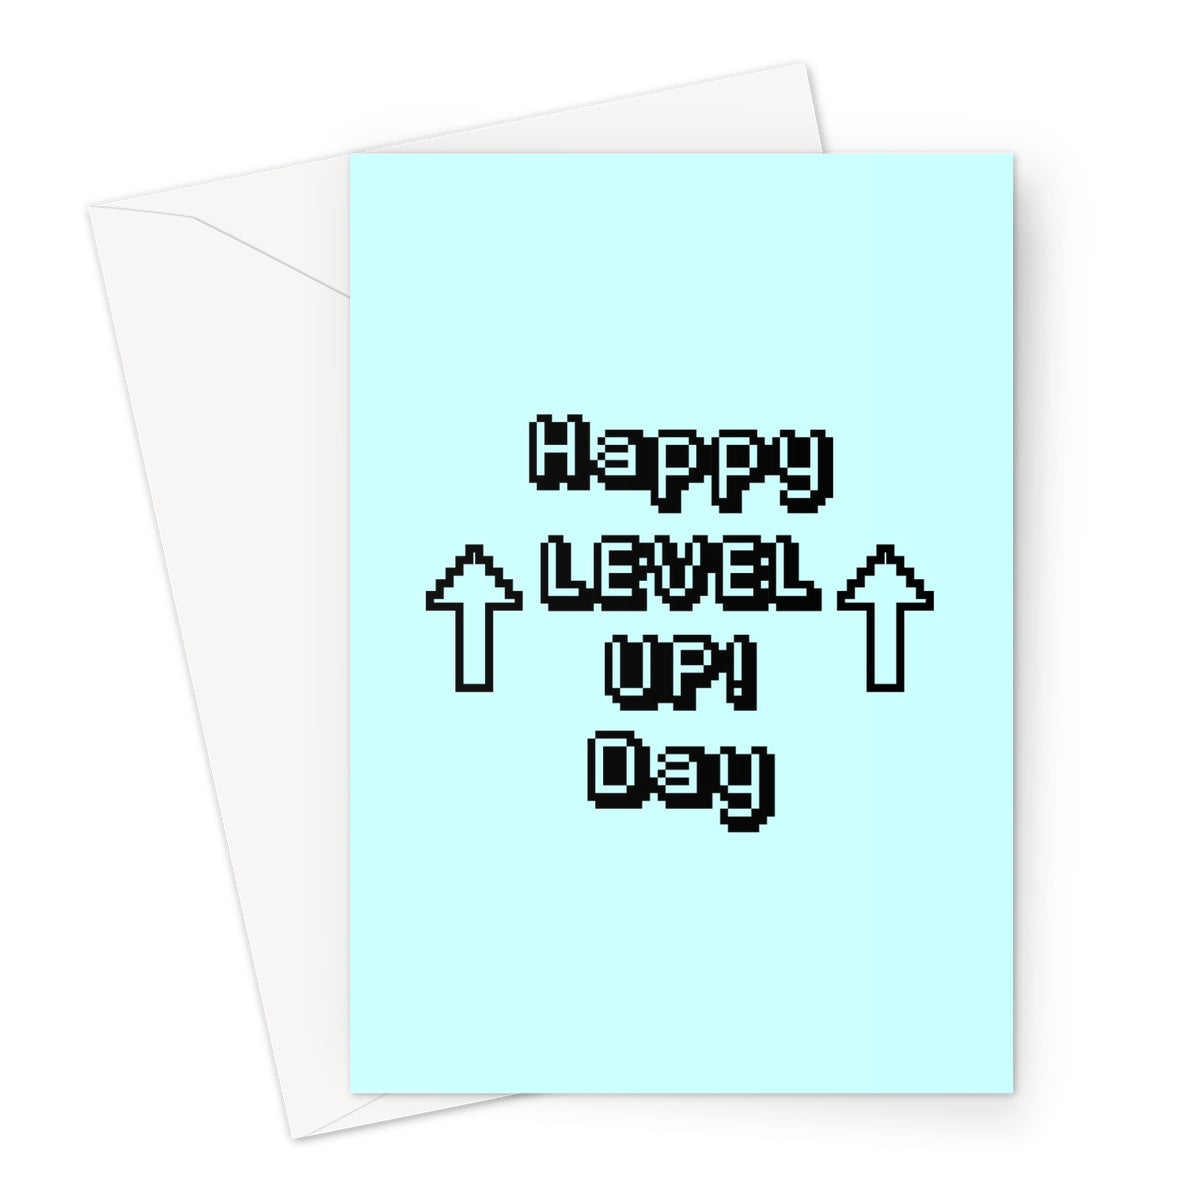 Happy Level UP! Day - Gamer Collection - Retro 8bit BLUE colour Greeting Card